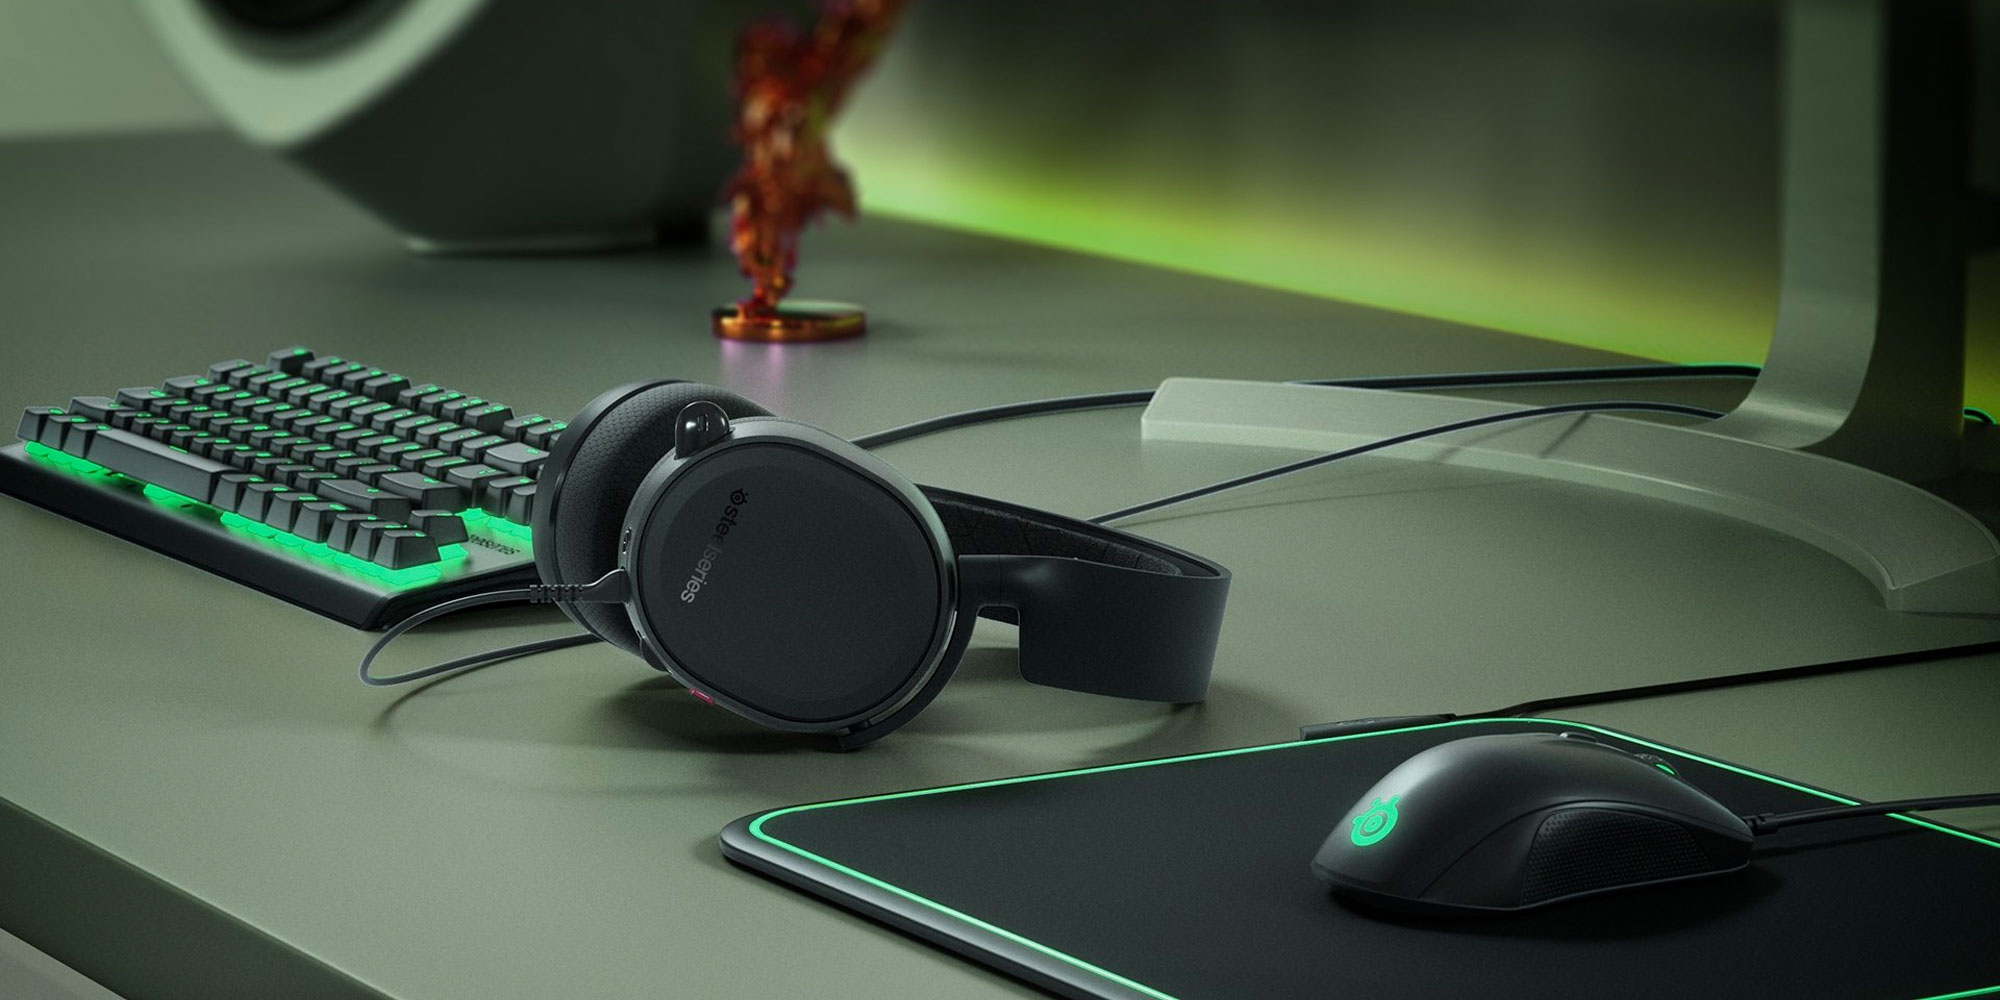 SteelSeries budget-friendly Arctis 3 gaming headset now $51 (Reg. up to $70)